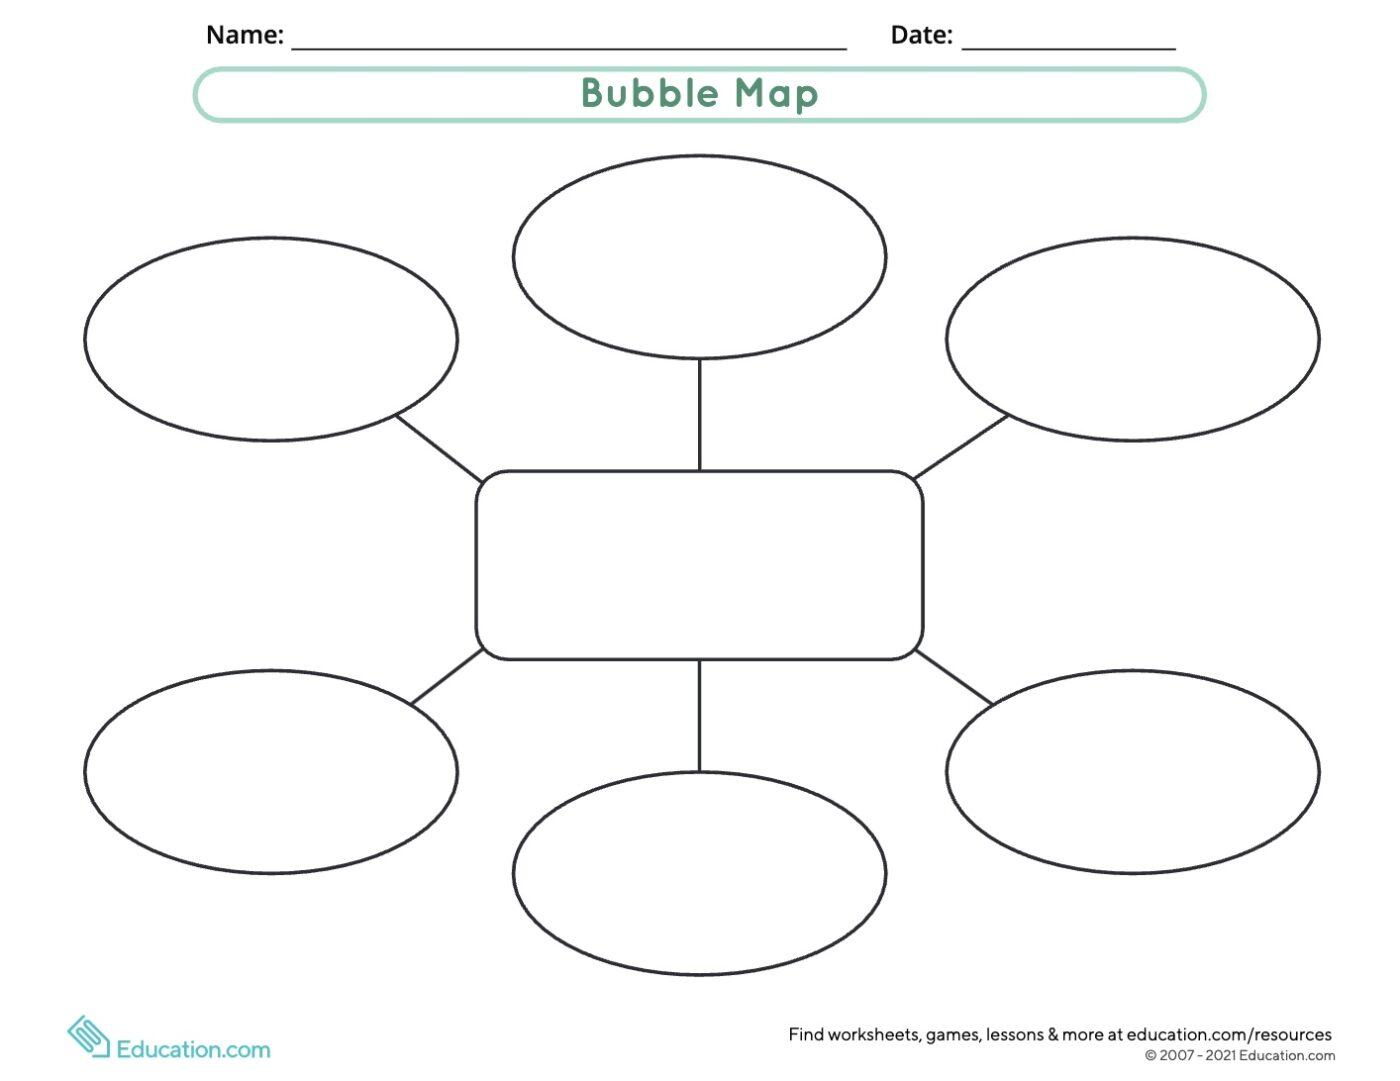 Bubble Map Worksheet Template by Education.com